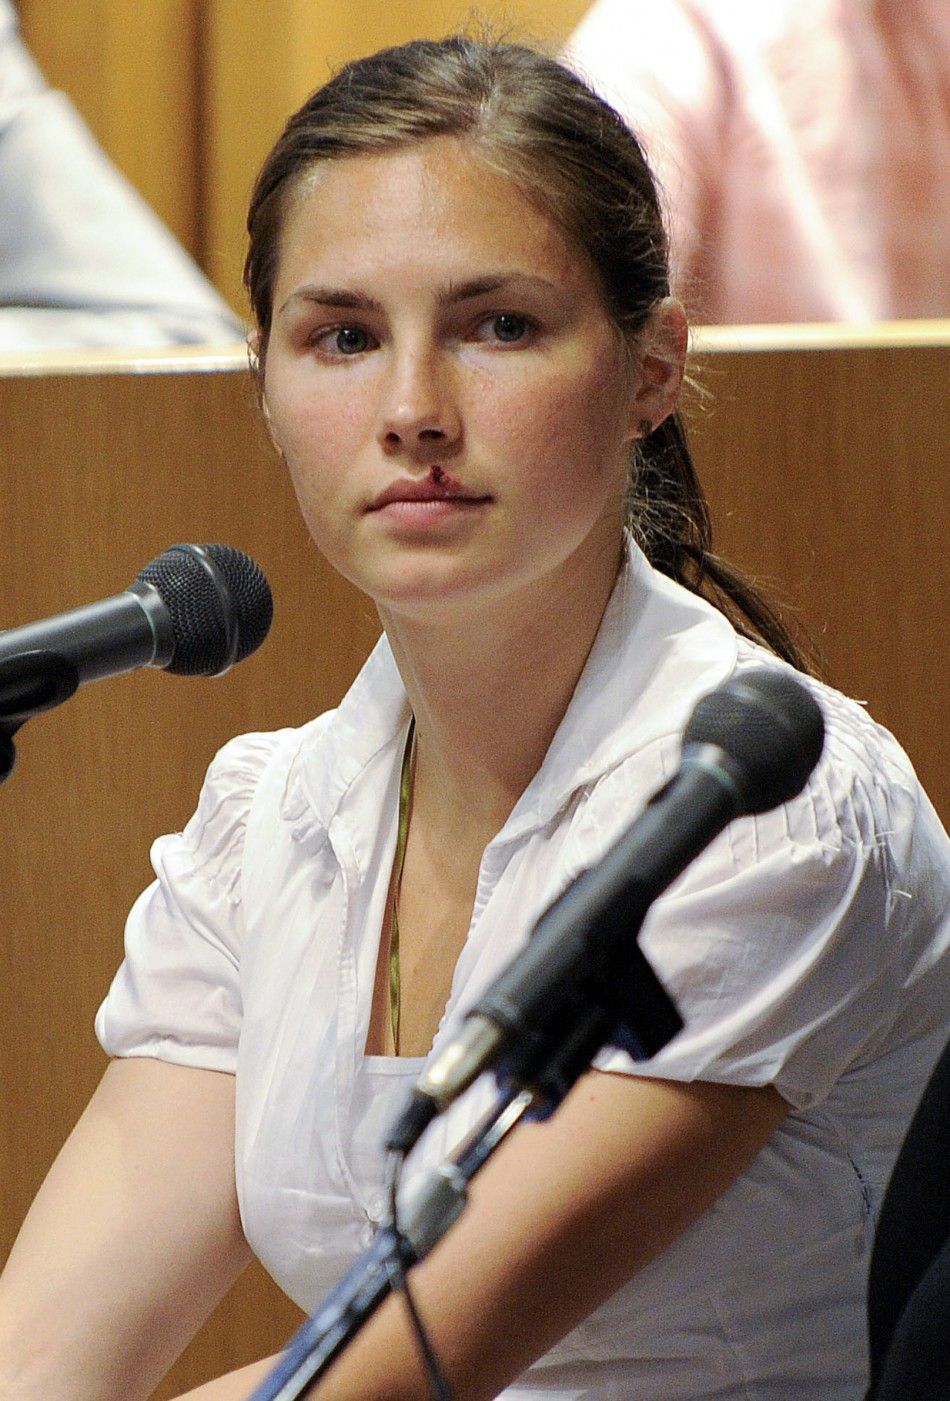 Jailed murder suspect Amanda Knox of the U.S. gives evidence at her trial for murder in Perugia 